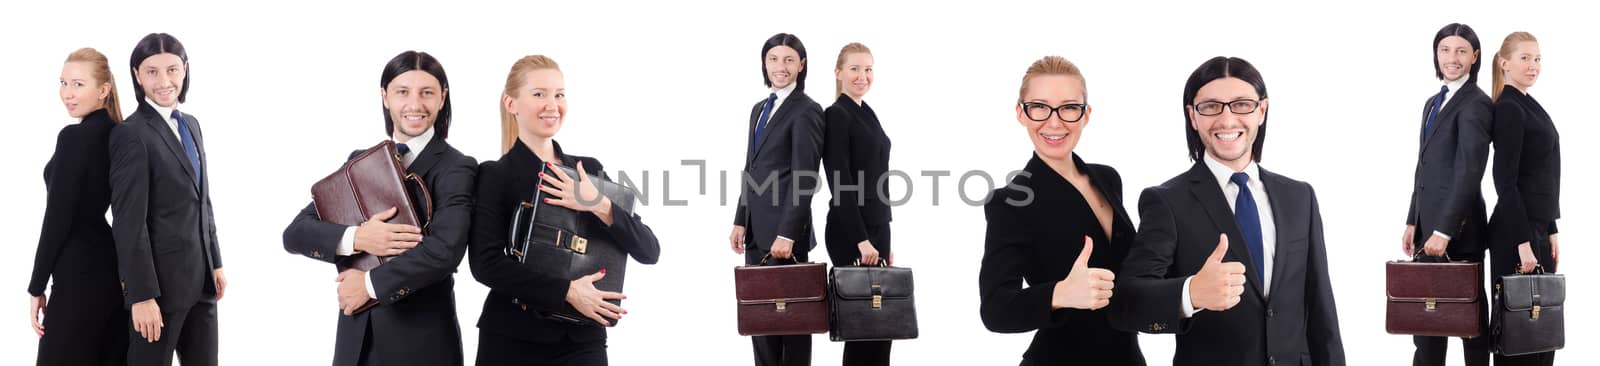 Businessman and businesswoman with briefcases isolated on white by Elnur